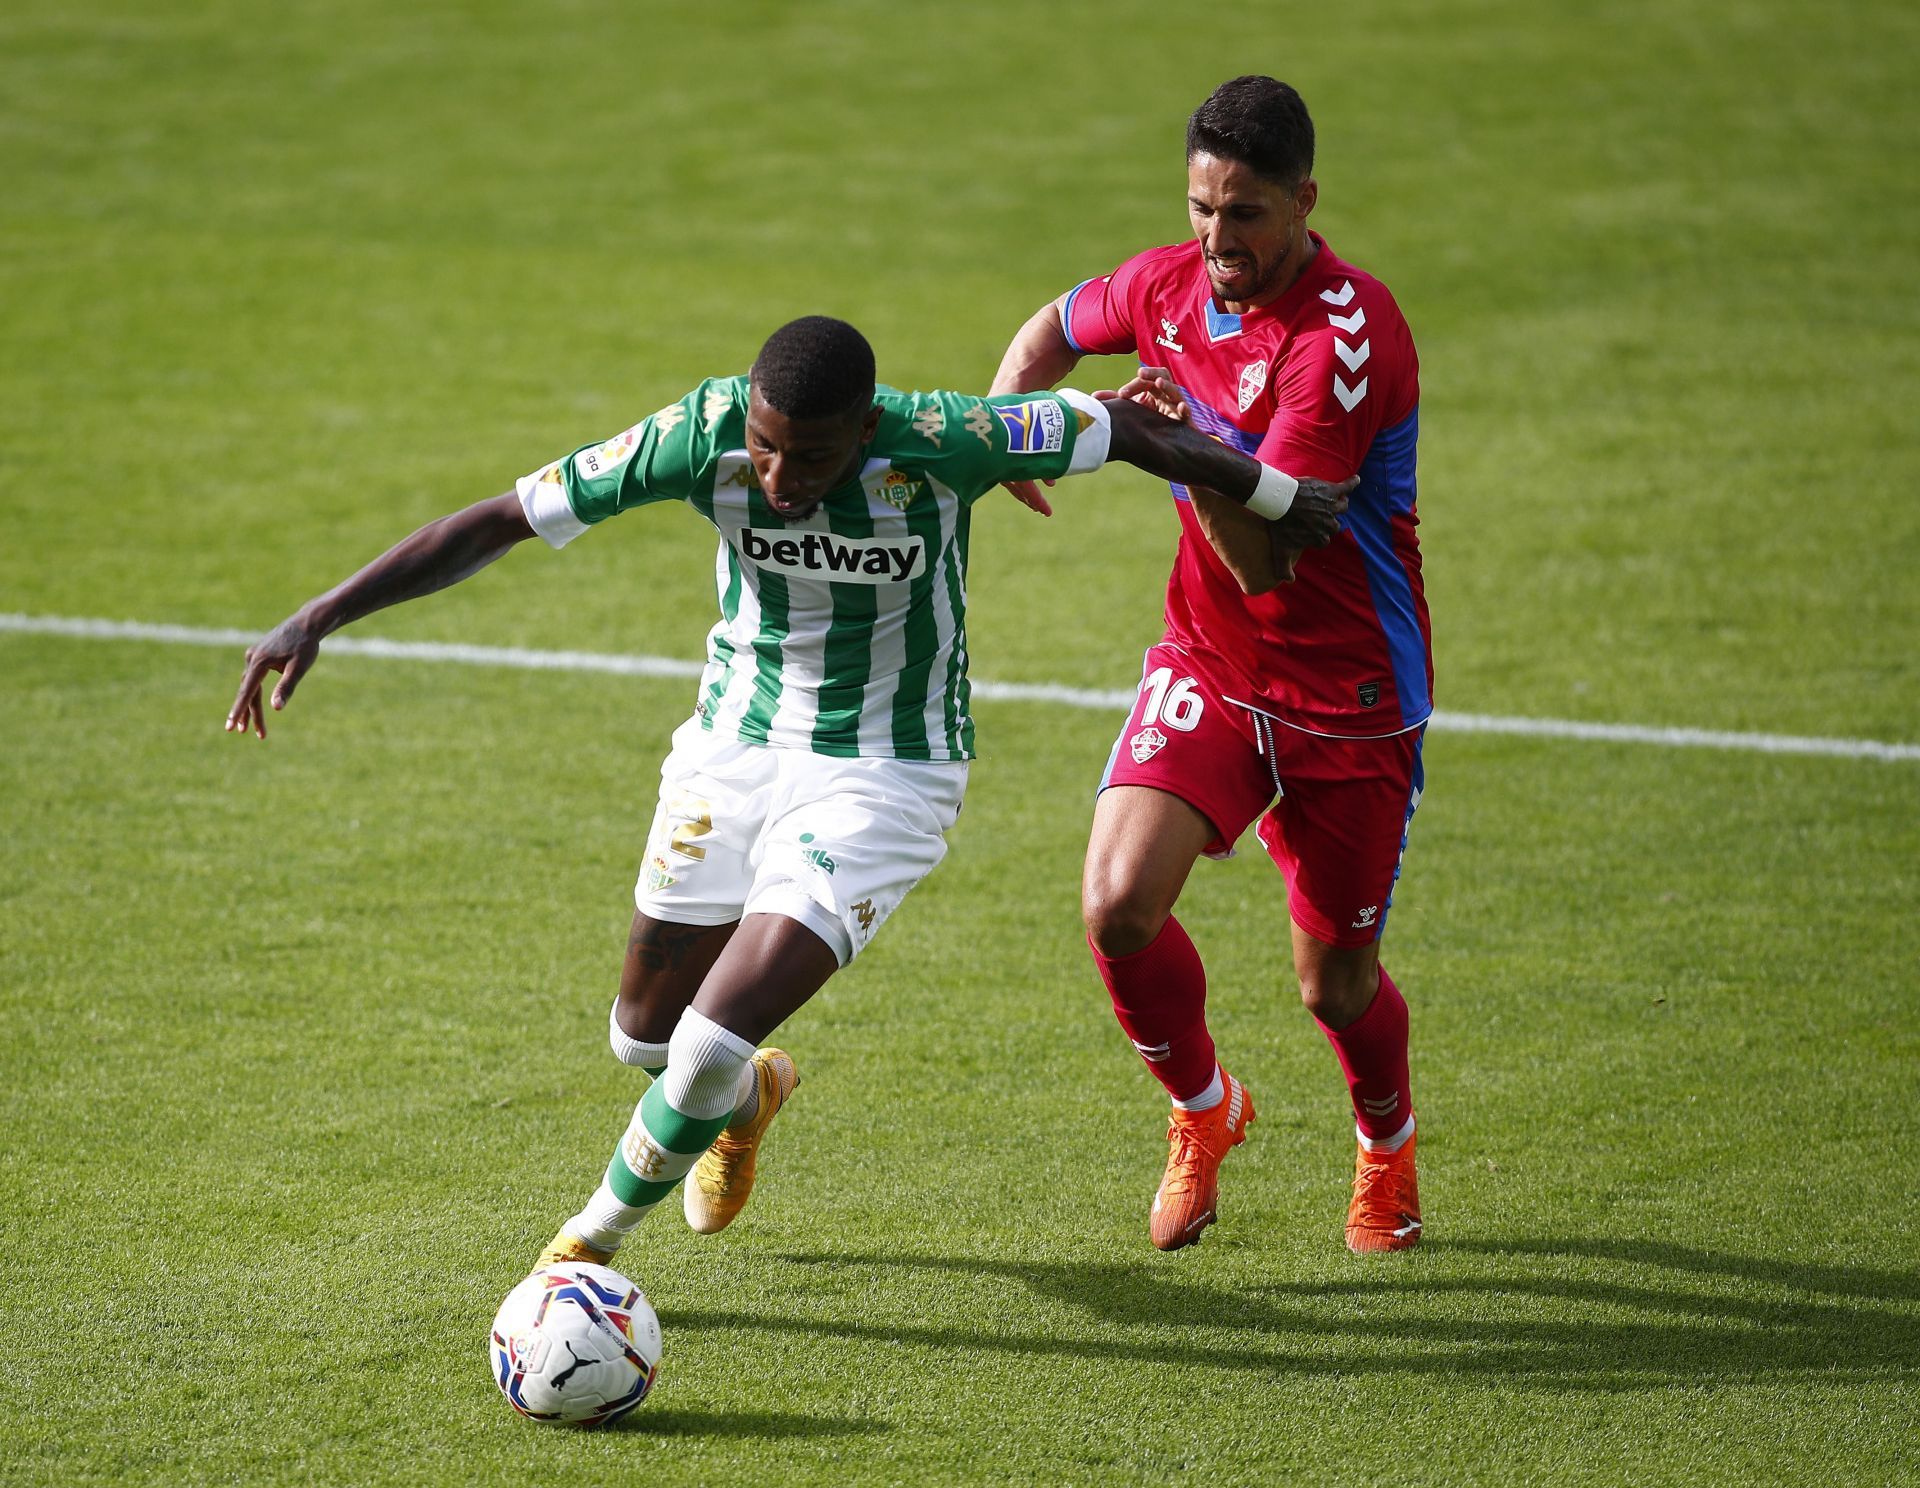 Real Betis will host Elche in their midweek La Liga fixture on Tuesday